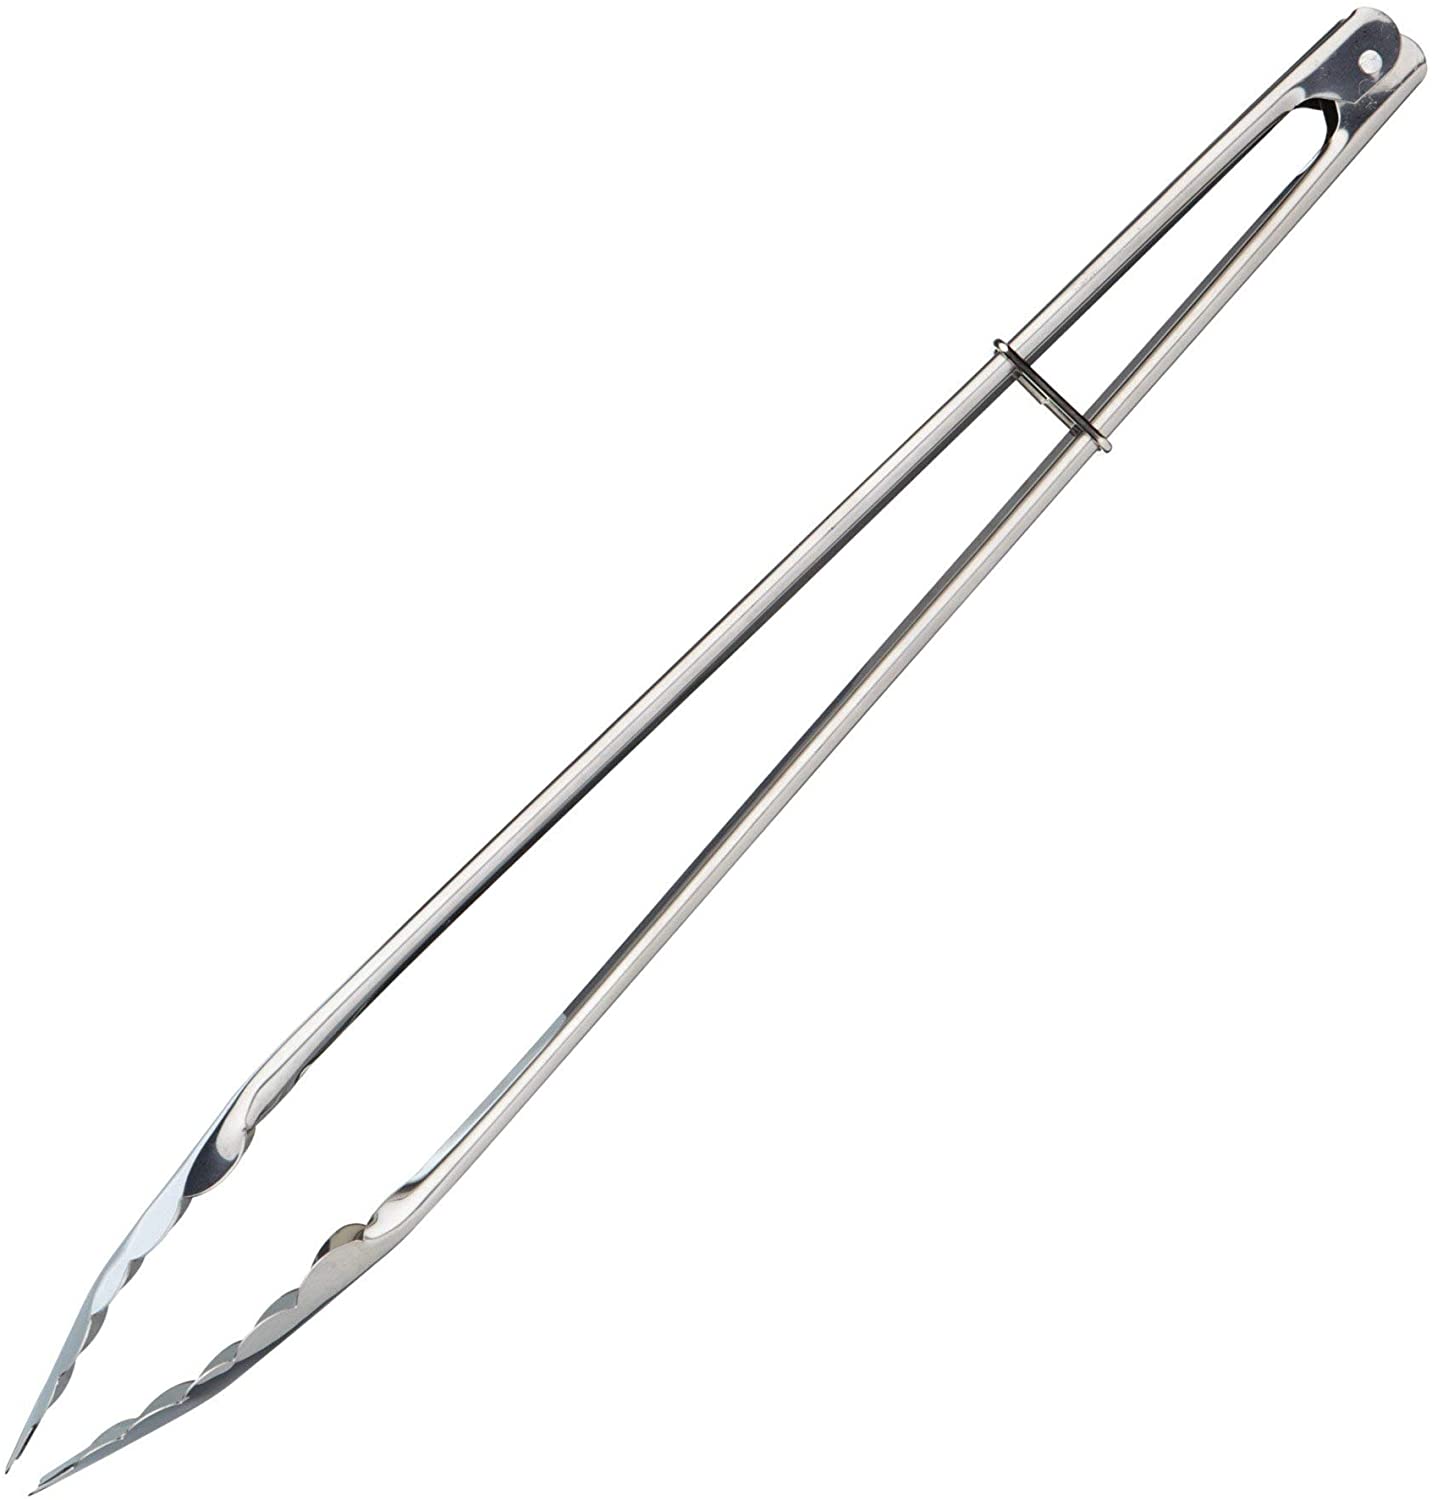 KitchenCraft Kitchen Craft food tongs, stainless steel, 40cm